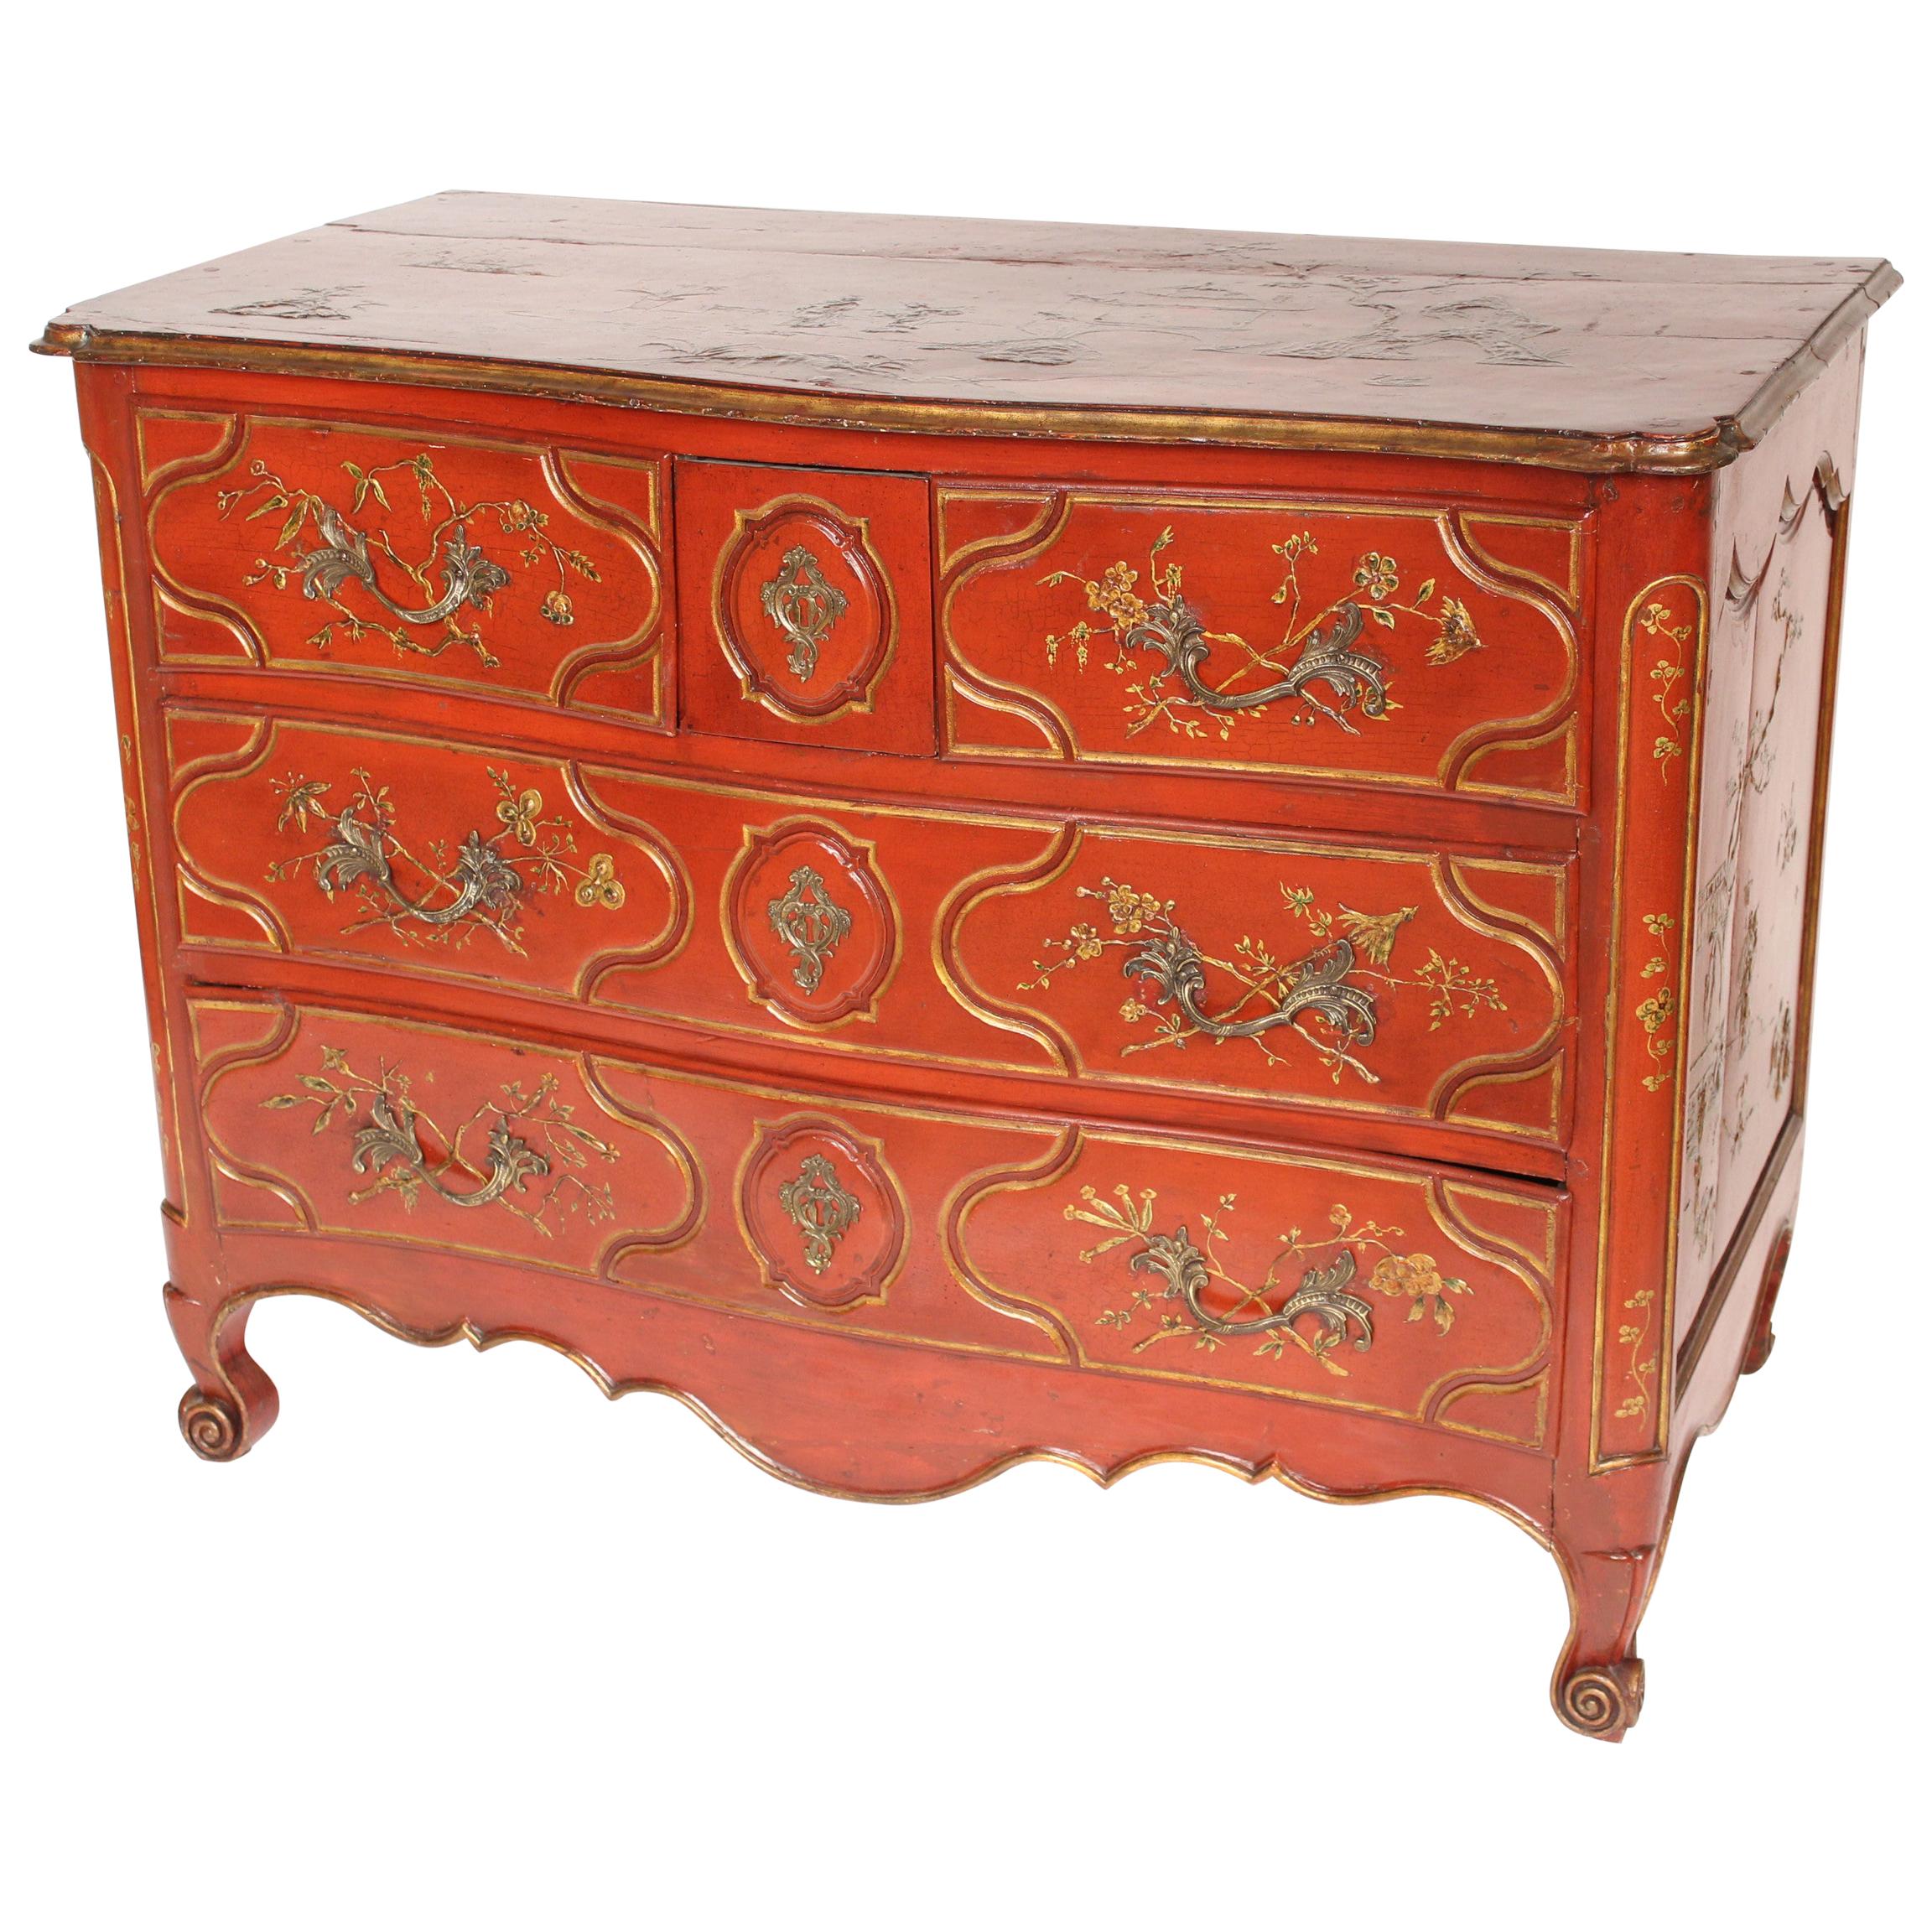 Antique Louis XV Provincial Style Red Chinoiserie Decorated Chest of Drawers For Sale